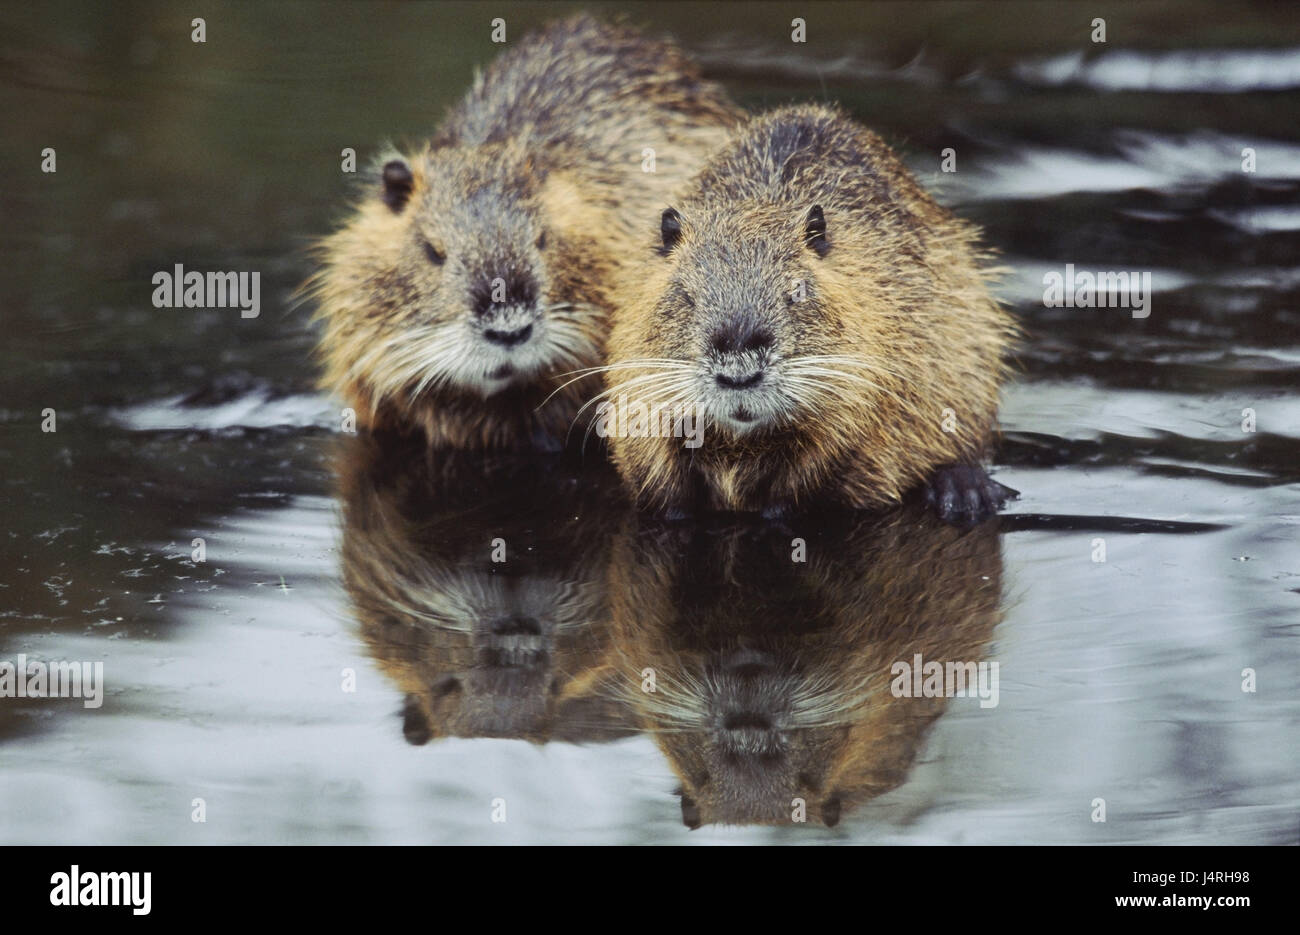 Nutria, beavers, Myocastor coypus, marsh beavers, tail beavers, tail rat, Coypu, water rat, adult, full-grown, nature, Wildlife, animals, wild animal, mammal, mammal, Mammalia, rodent, Rodentia, beaver, Neozoon, clean, scratch, clean, watchfully, river, sweetly, drolly, tourist attraction, Auswilderung, diurnal, behaviour, prey, fur animal, Peltier's breeding, water, brook, unkemptly, shaggy, itches, fur care, care, Germany, Thuringia, hall field, to hall, Stock Photo